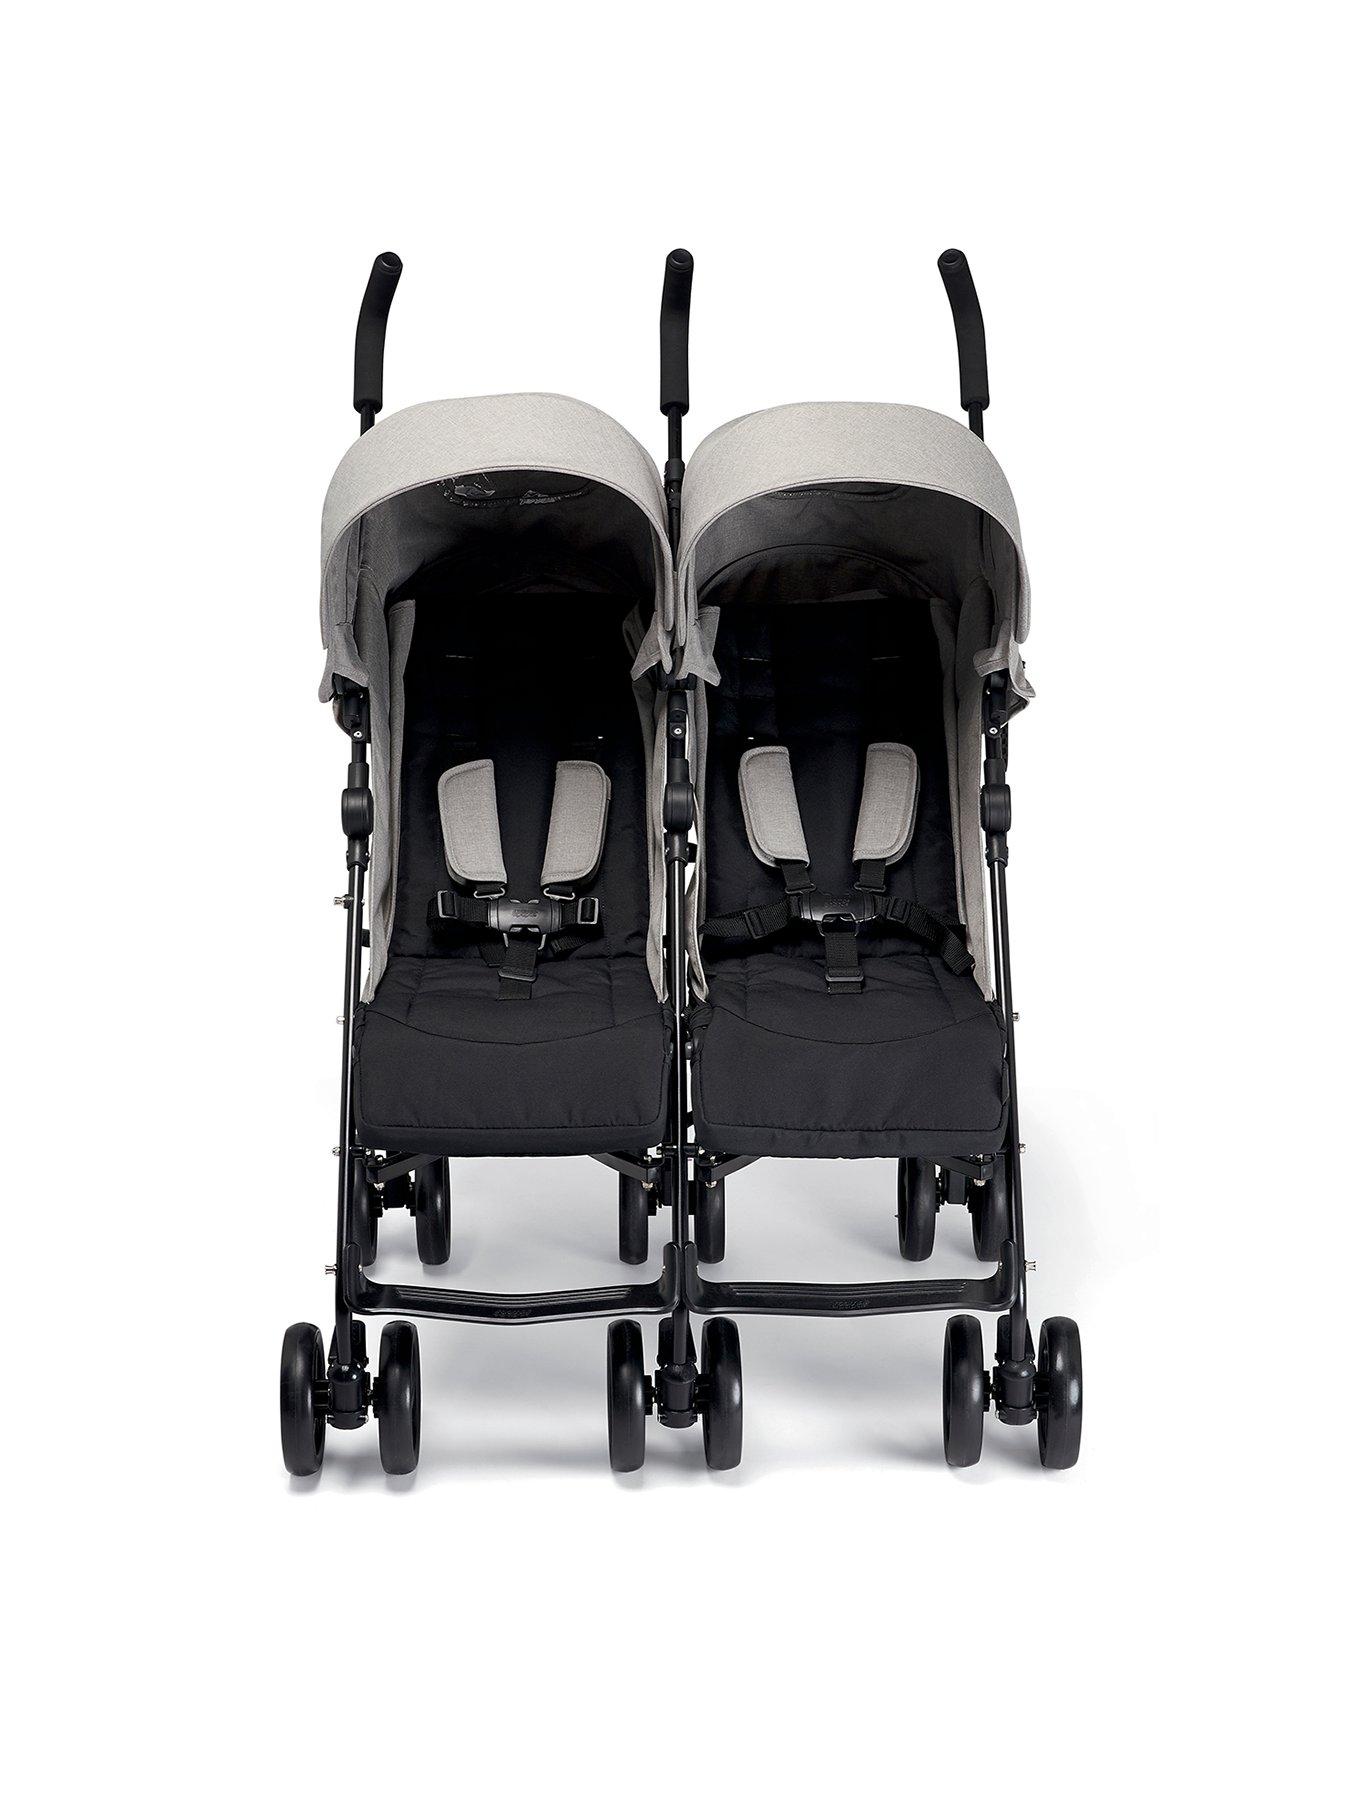 mamas and papas double pushchair